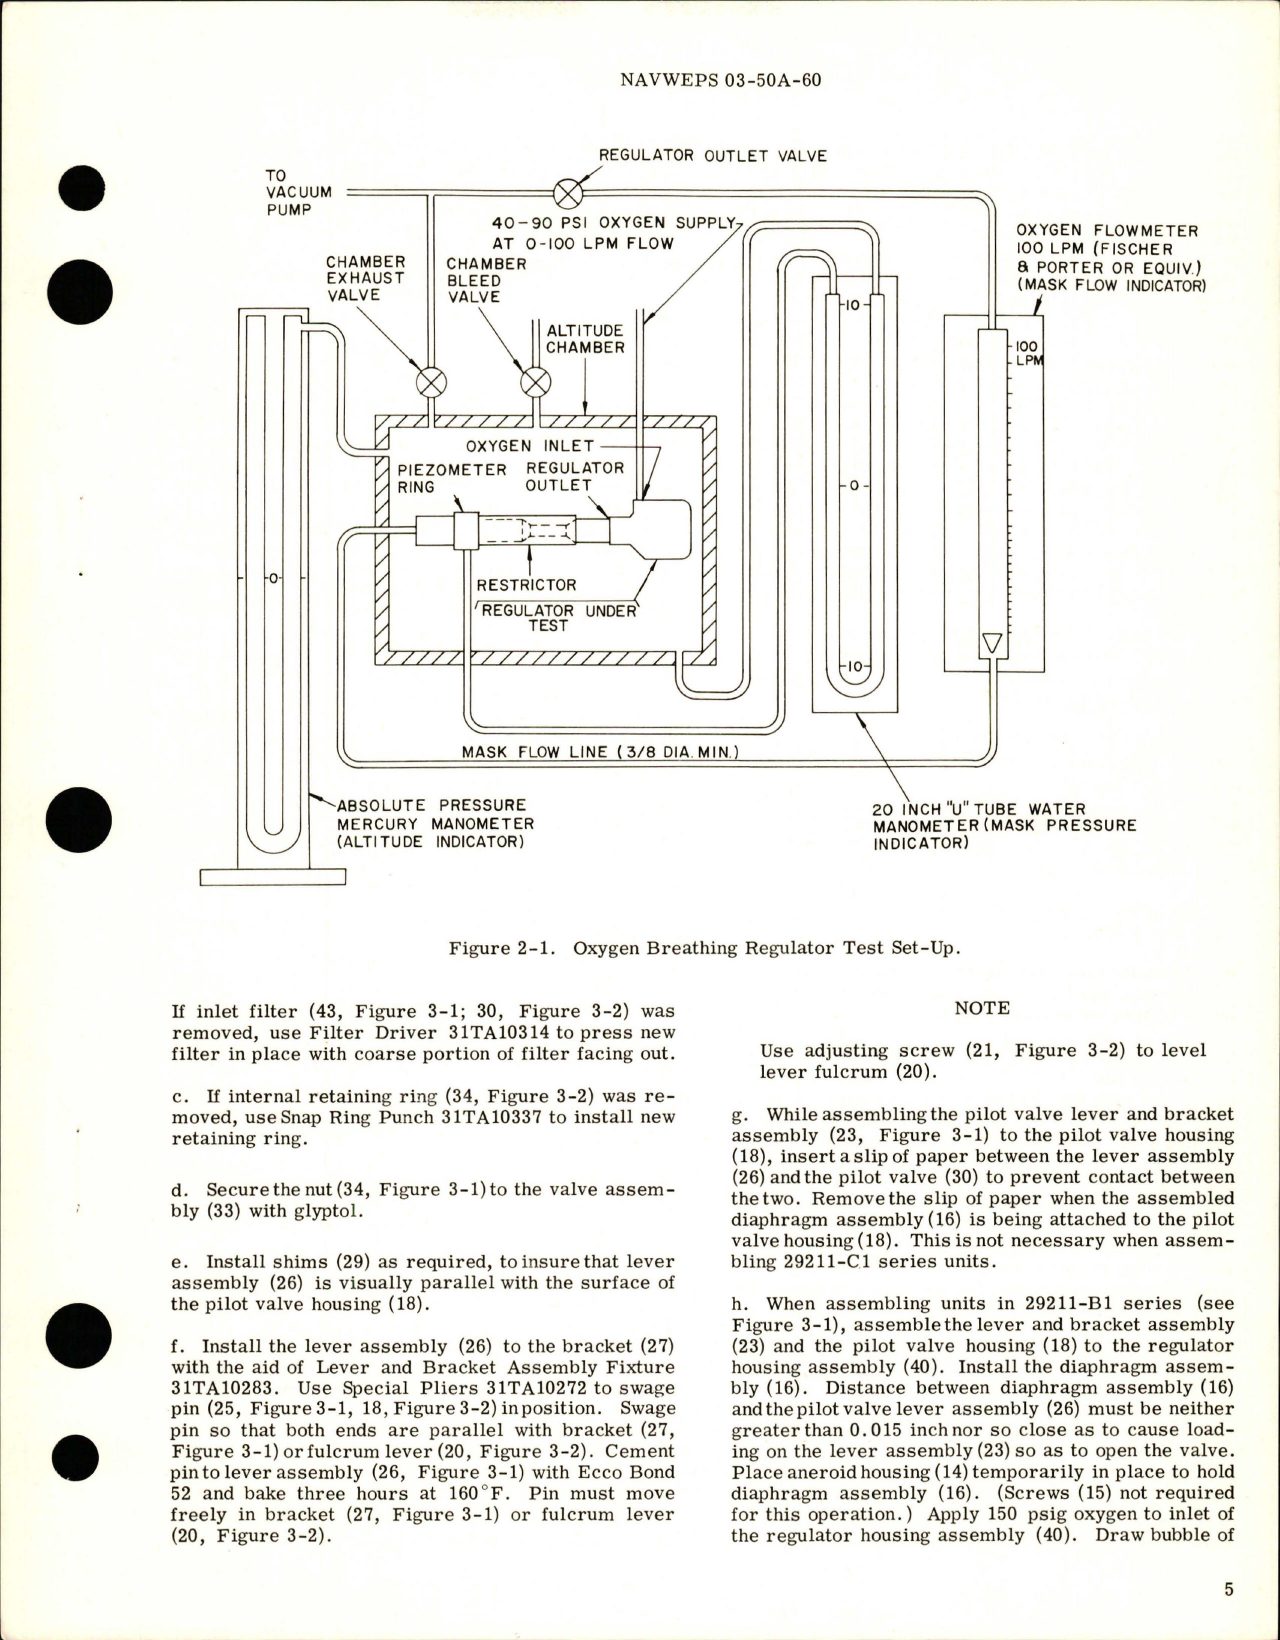 Sample page 5 from AirCorps Library document: Operation, Service, Overhaul Instructions, and Parts Breakdown for Miniature Oxygen Breathing Regulator - Models 29211-B1 and 29211-C1